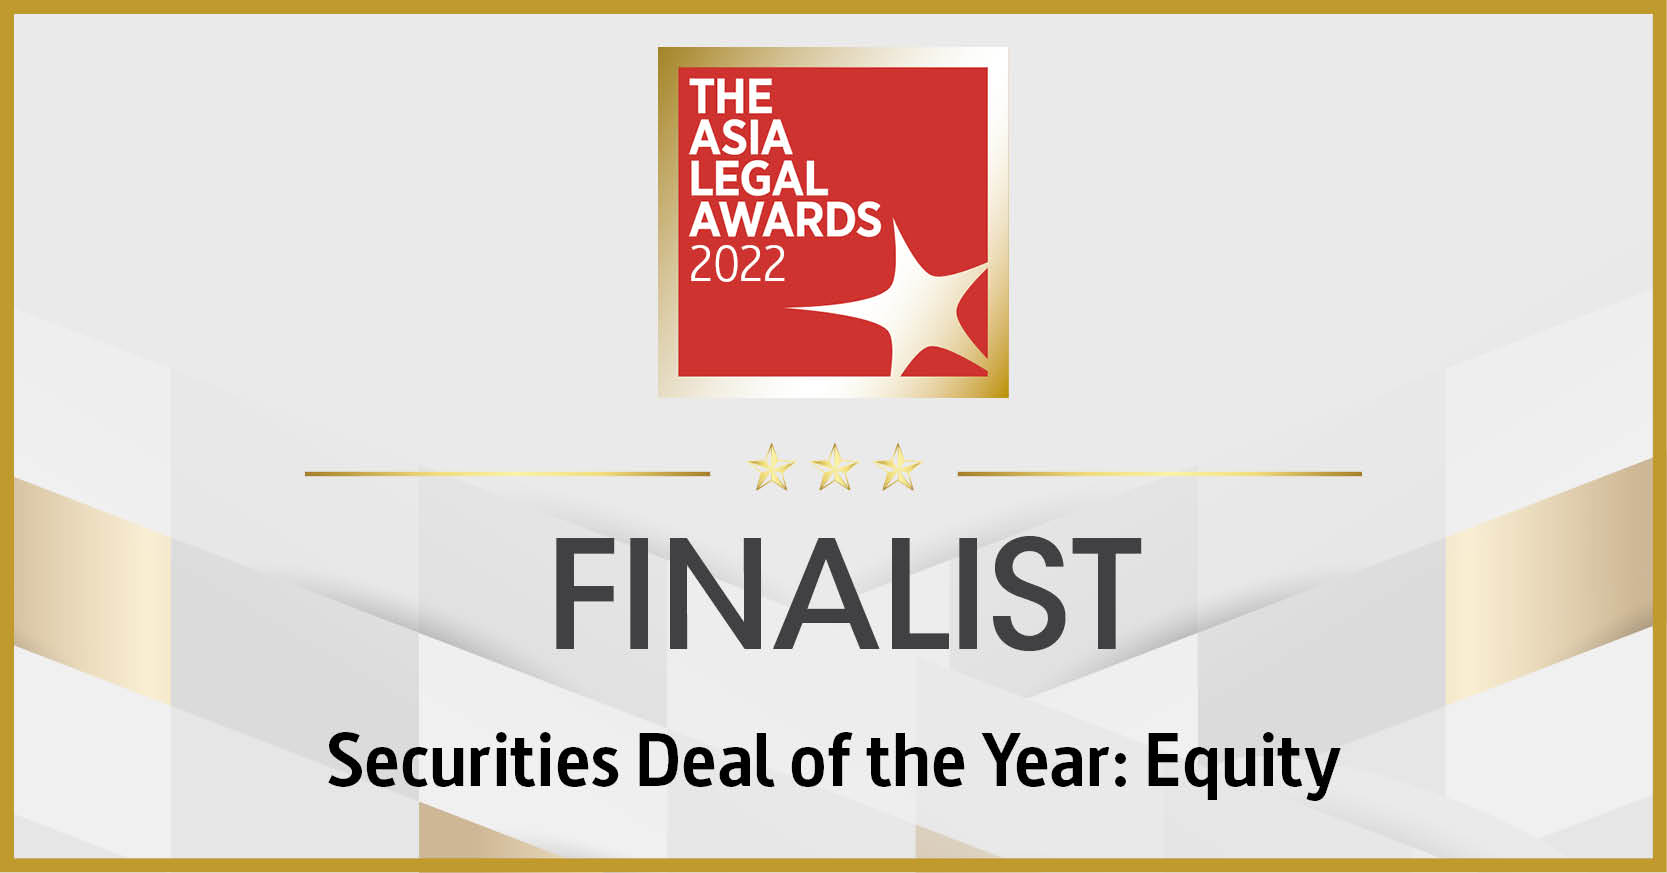 “Finalist” for Securities Deal of the Year: Equity at The Asia Legal Awards Deal Awards of the Year 2022